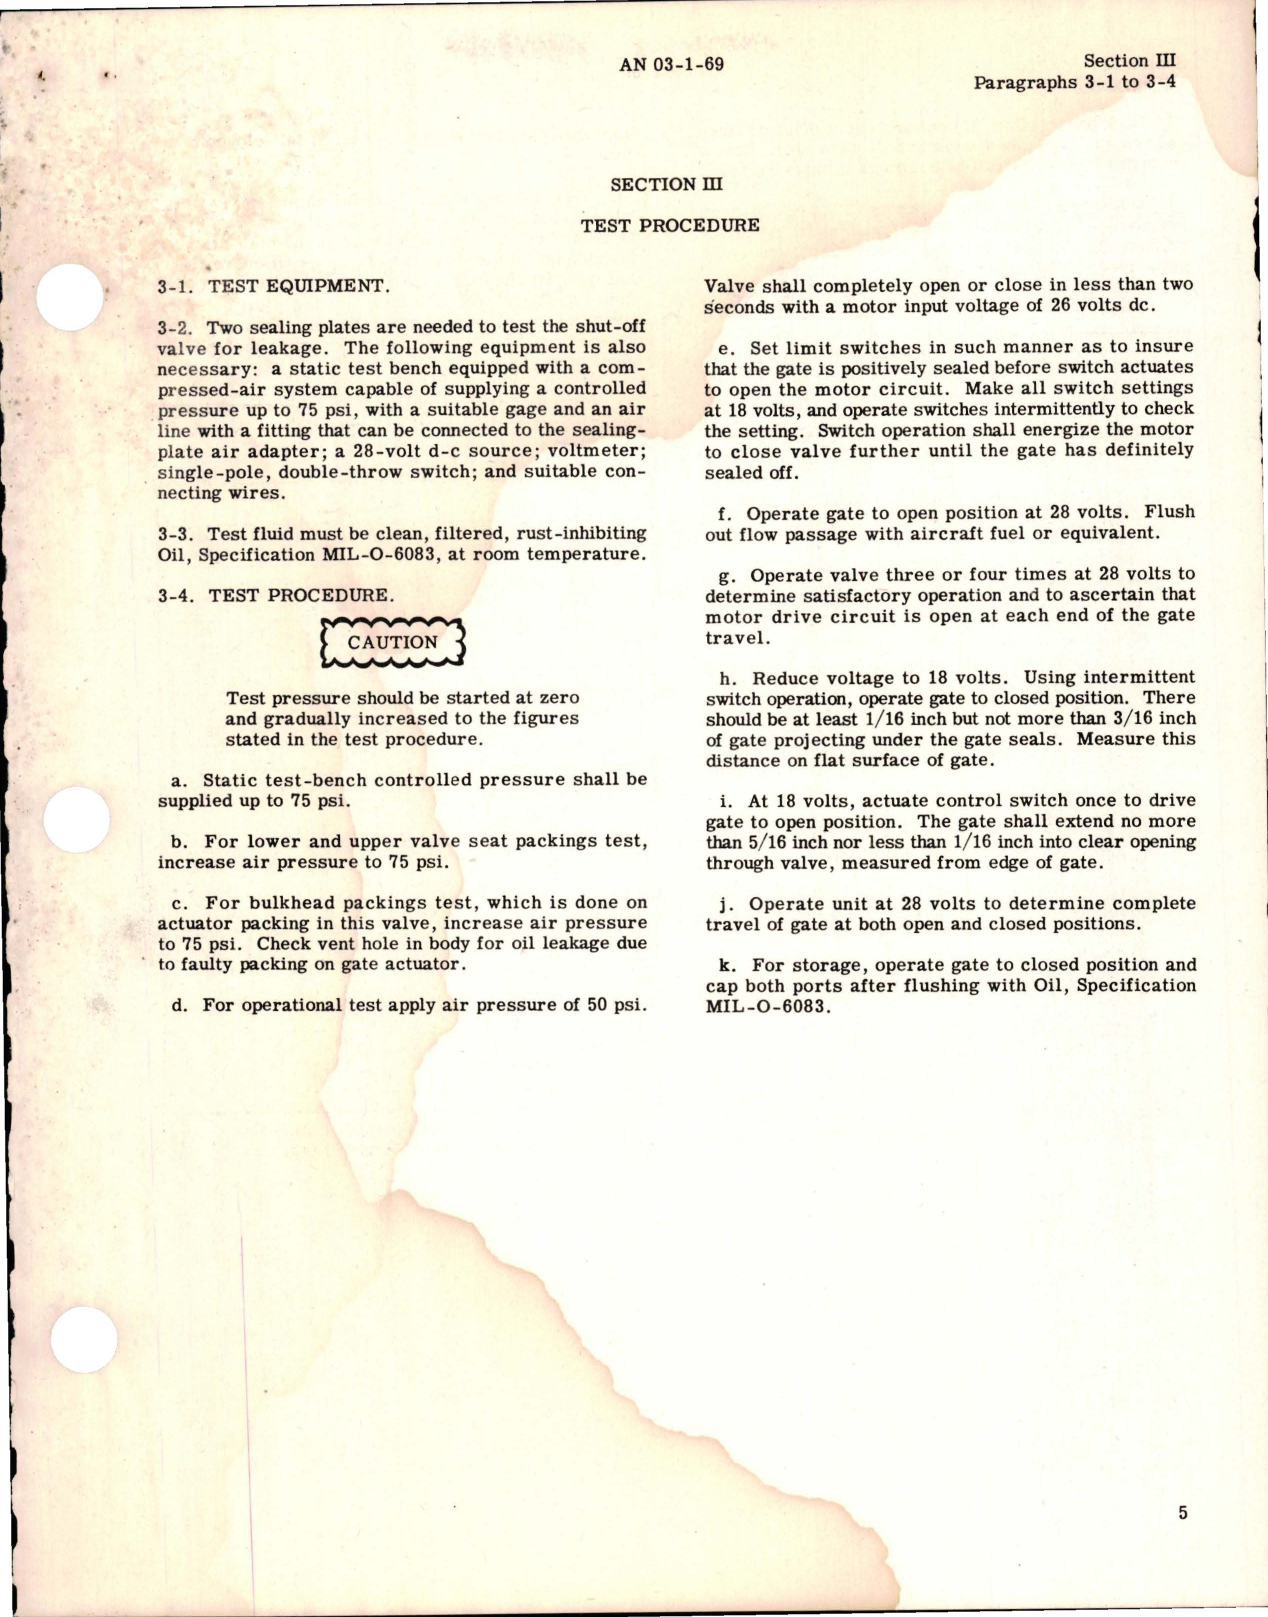 Sample page 9 from AirCorps Library document: Overhaul Instructions for Electric Shut-Off Gate Valves - Parts 